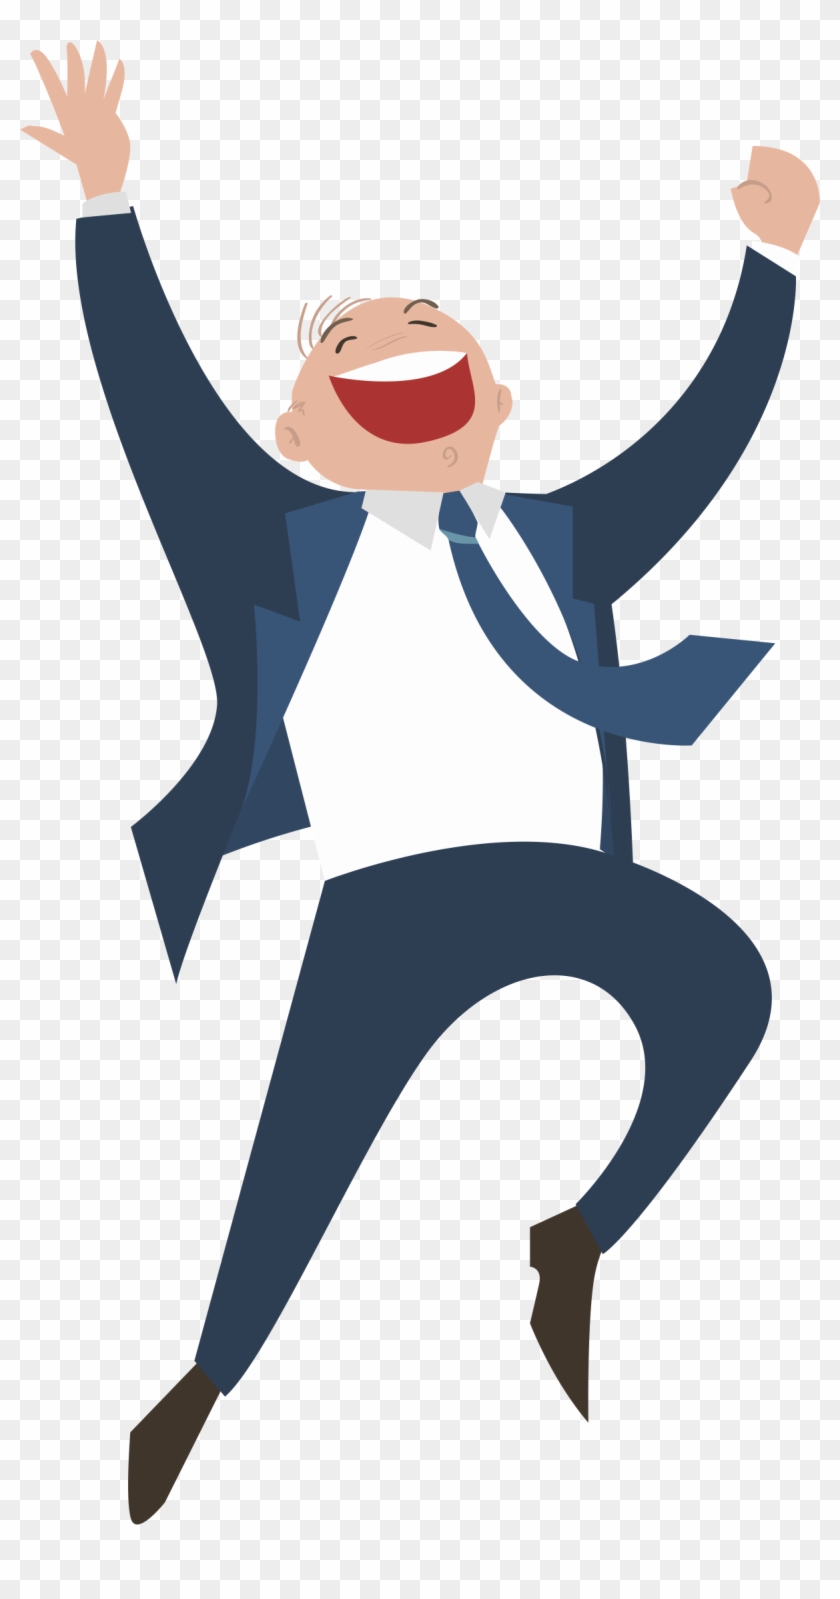 Happiness Illustration - Laughing Man - Happy Person Vector Png #299680